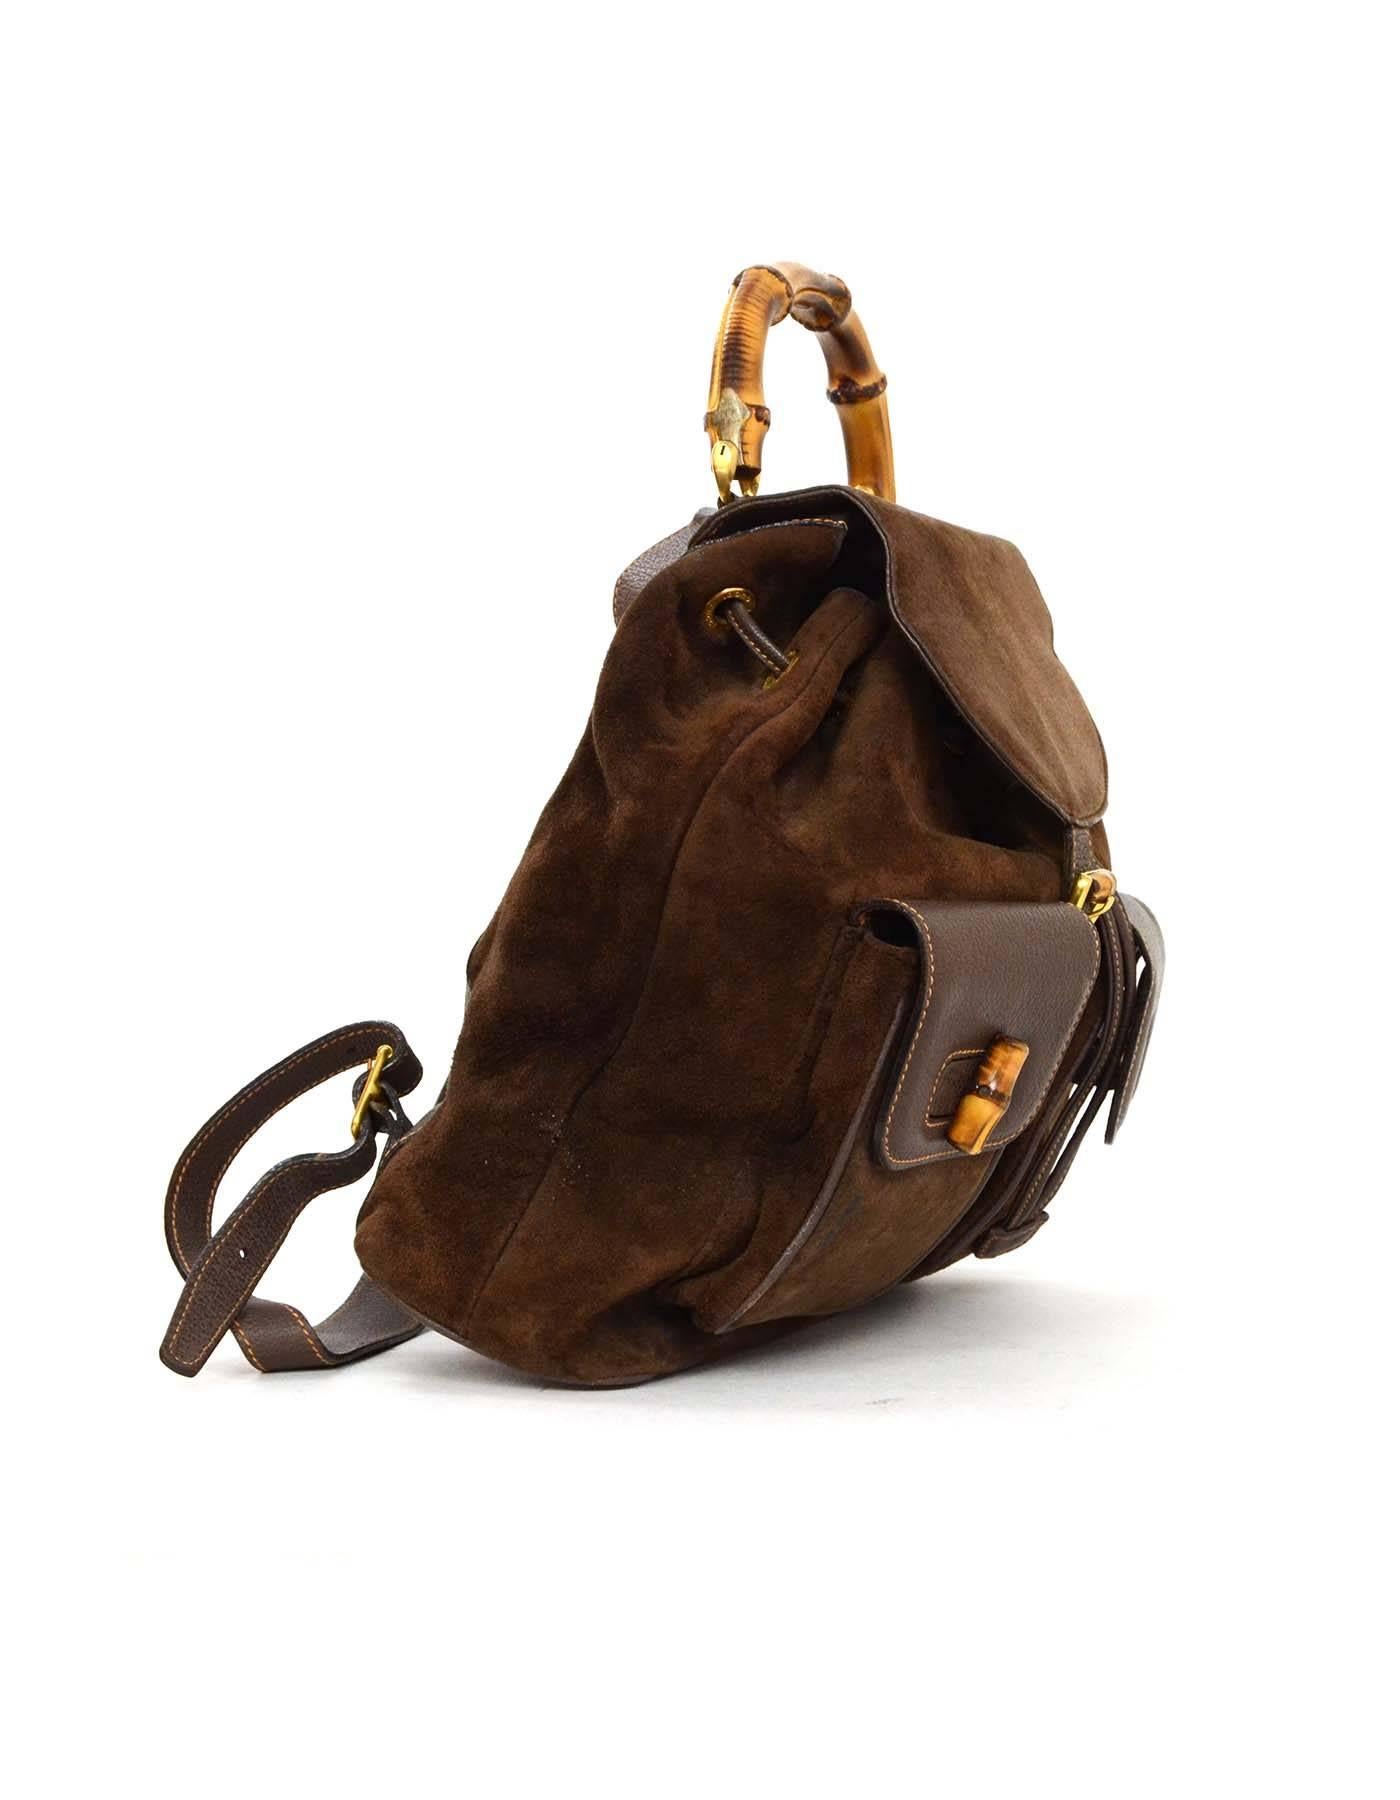 Gucci Brown Leather Suede Combo Backpack GHW
Features adjustable strap, tan contrast stitching, bamboo handle, gold hardware
Made in: Italy
Color: Brown
Hardware: Goldtone
Materials: Leather/ Suede
Lining: Mustard yellow